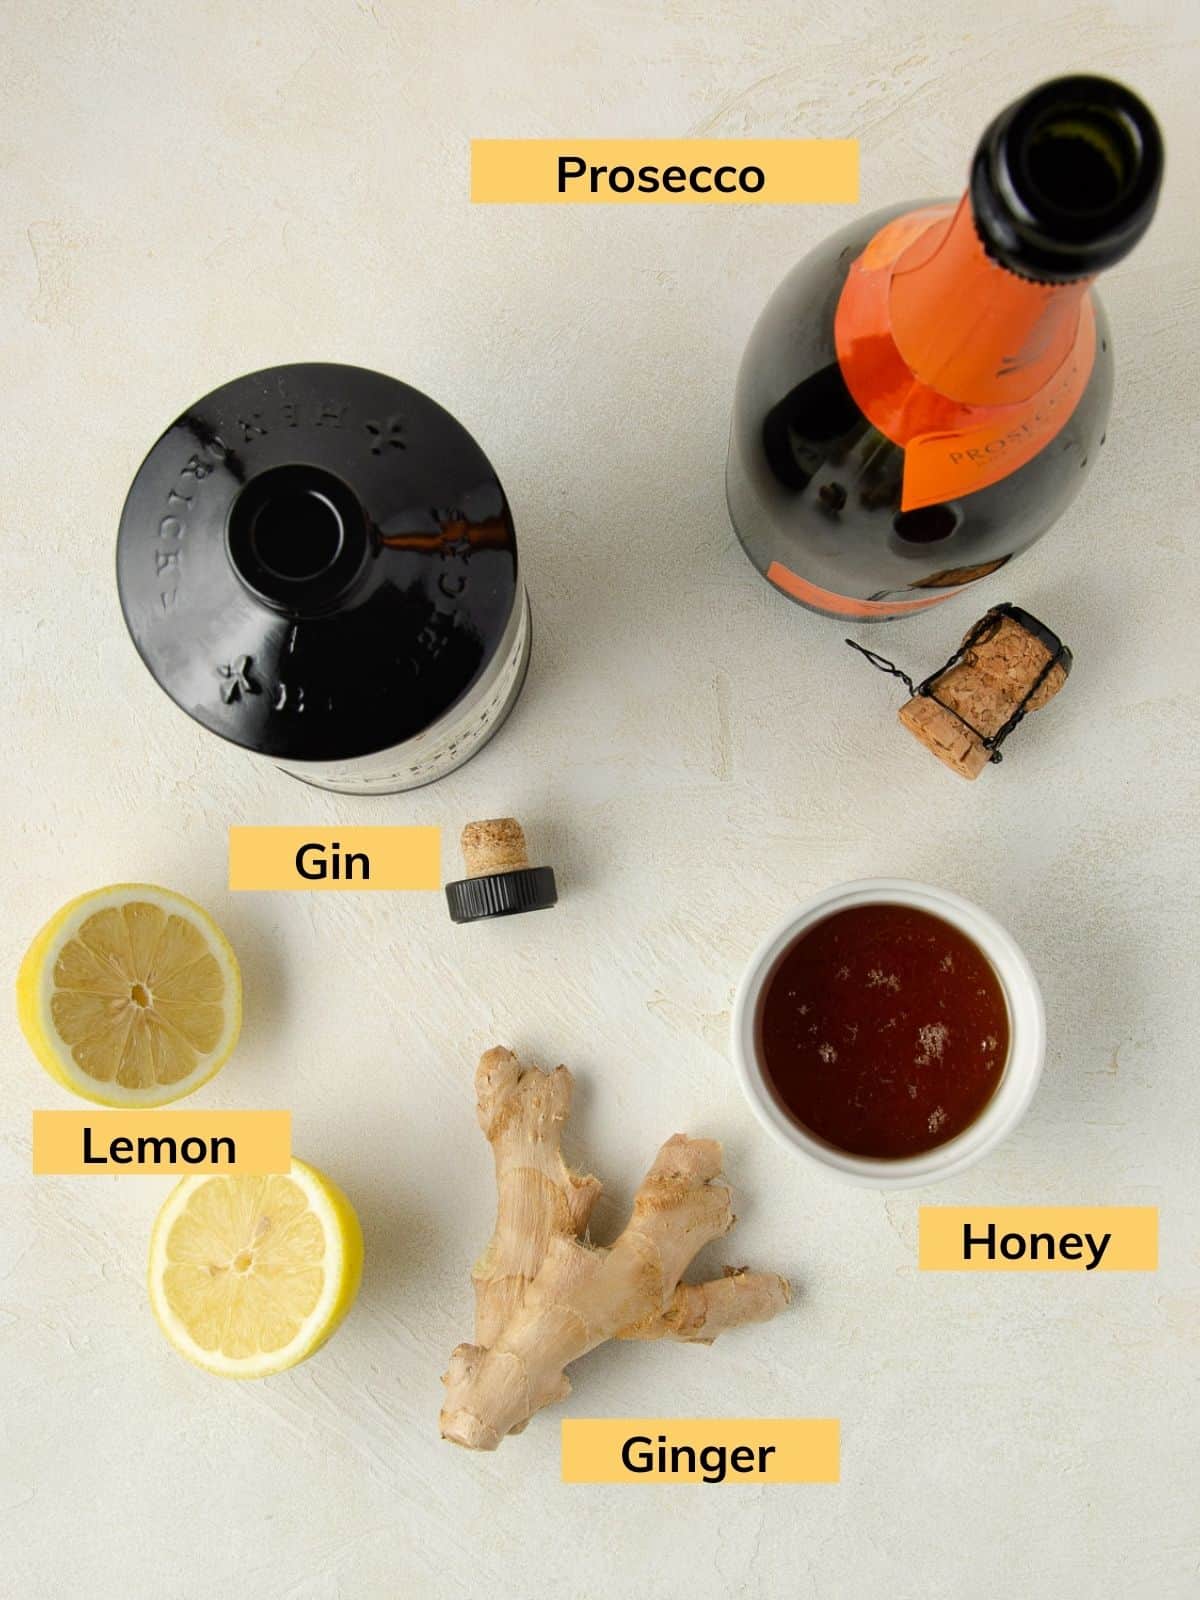 Ingredients for honey ginger prosecco cocktail.